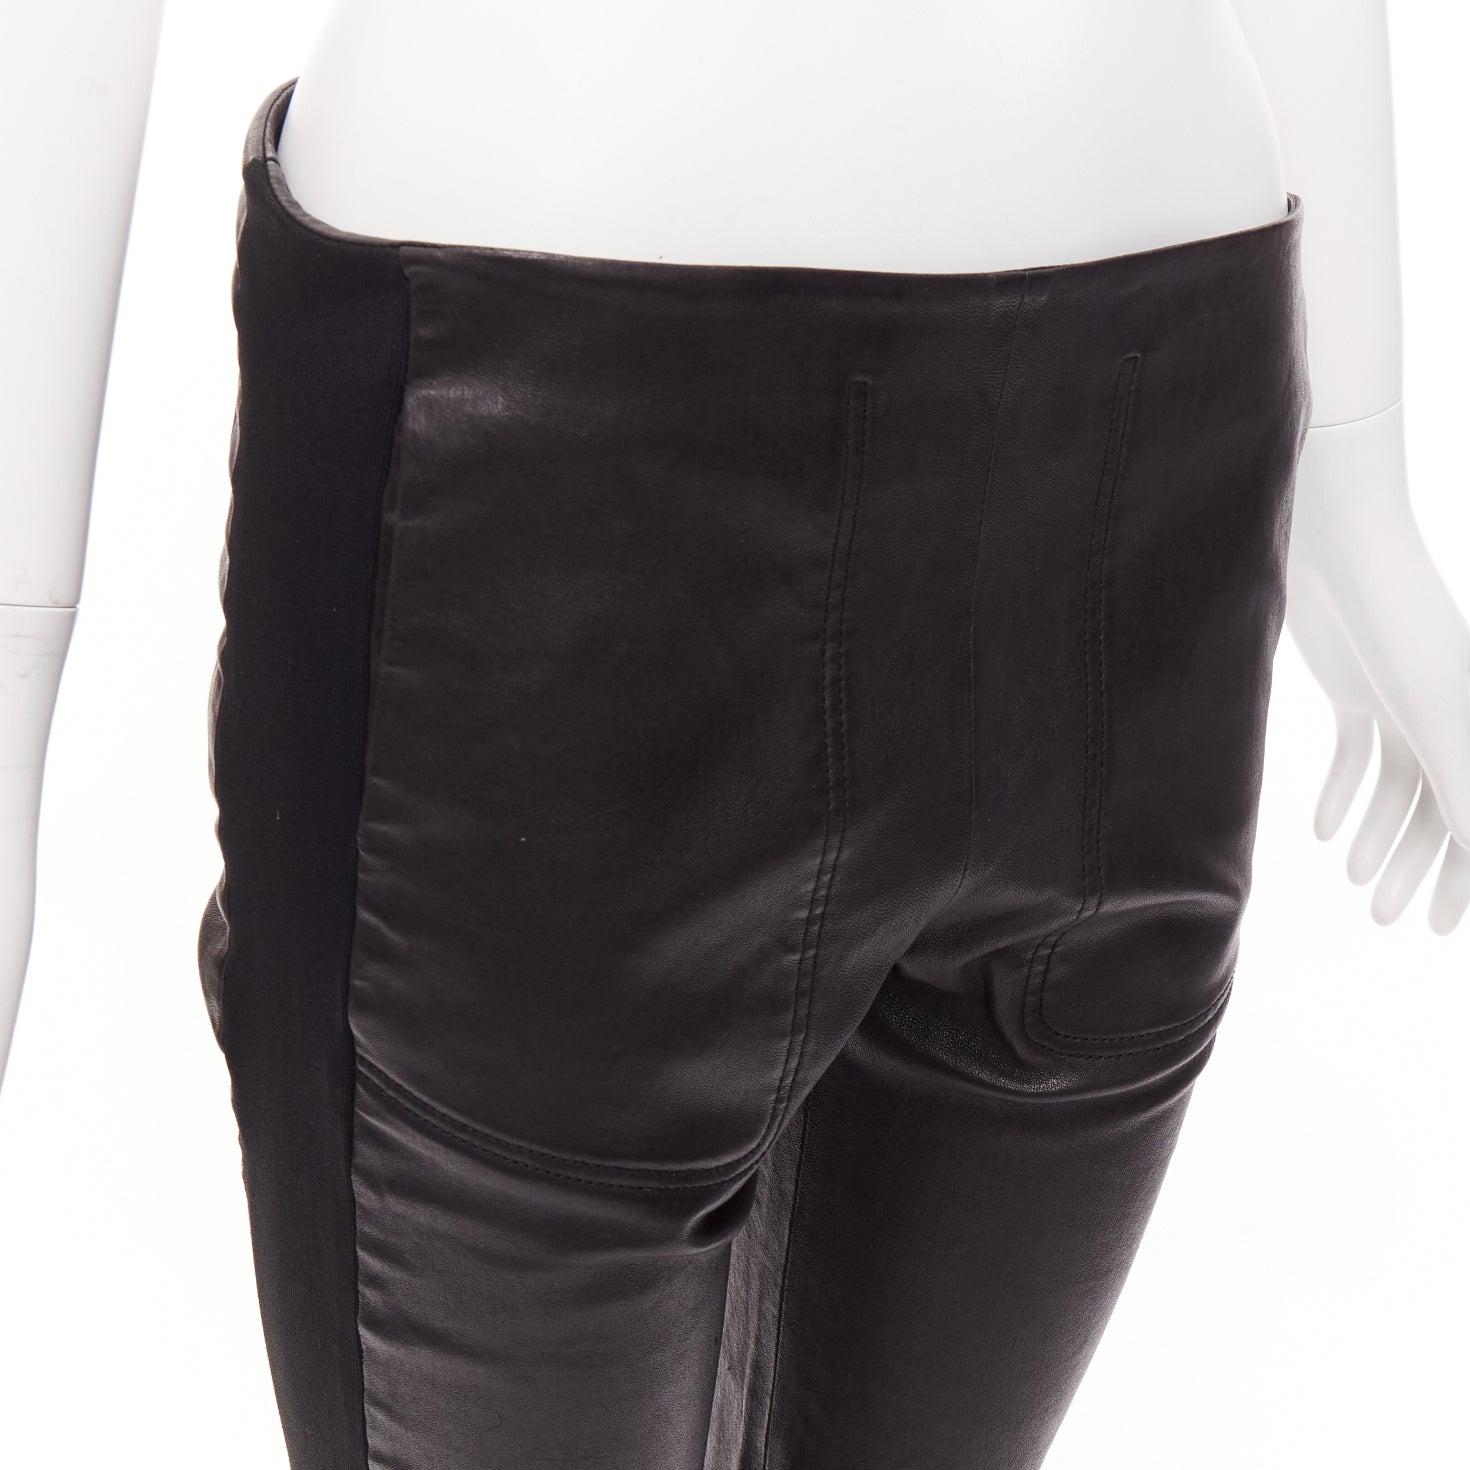 BALENCIAGA LEATHER 2011 black lambskin blend moto cuffed pants FR40 L
Reference: CNPG/A00055
Brand: Balenciaga
Designer: Nicolas Ghesquiere
Collection: Leather 2011
Material: Leather, Fabric
Color: Black
Pattern: Solid
Closure: Zip
Lining: Black